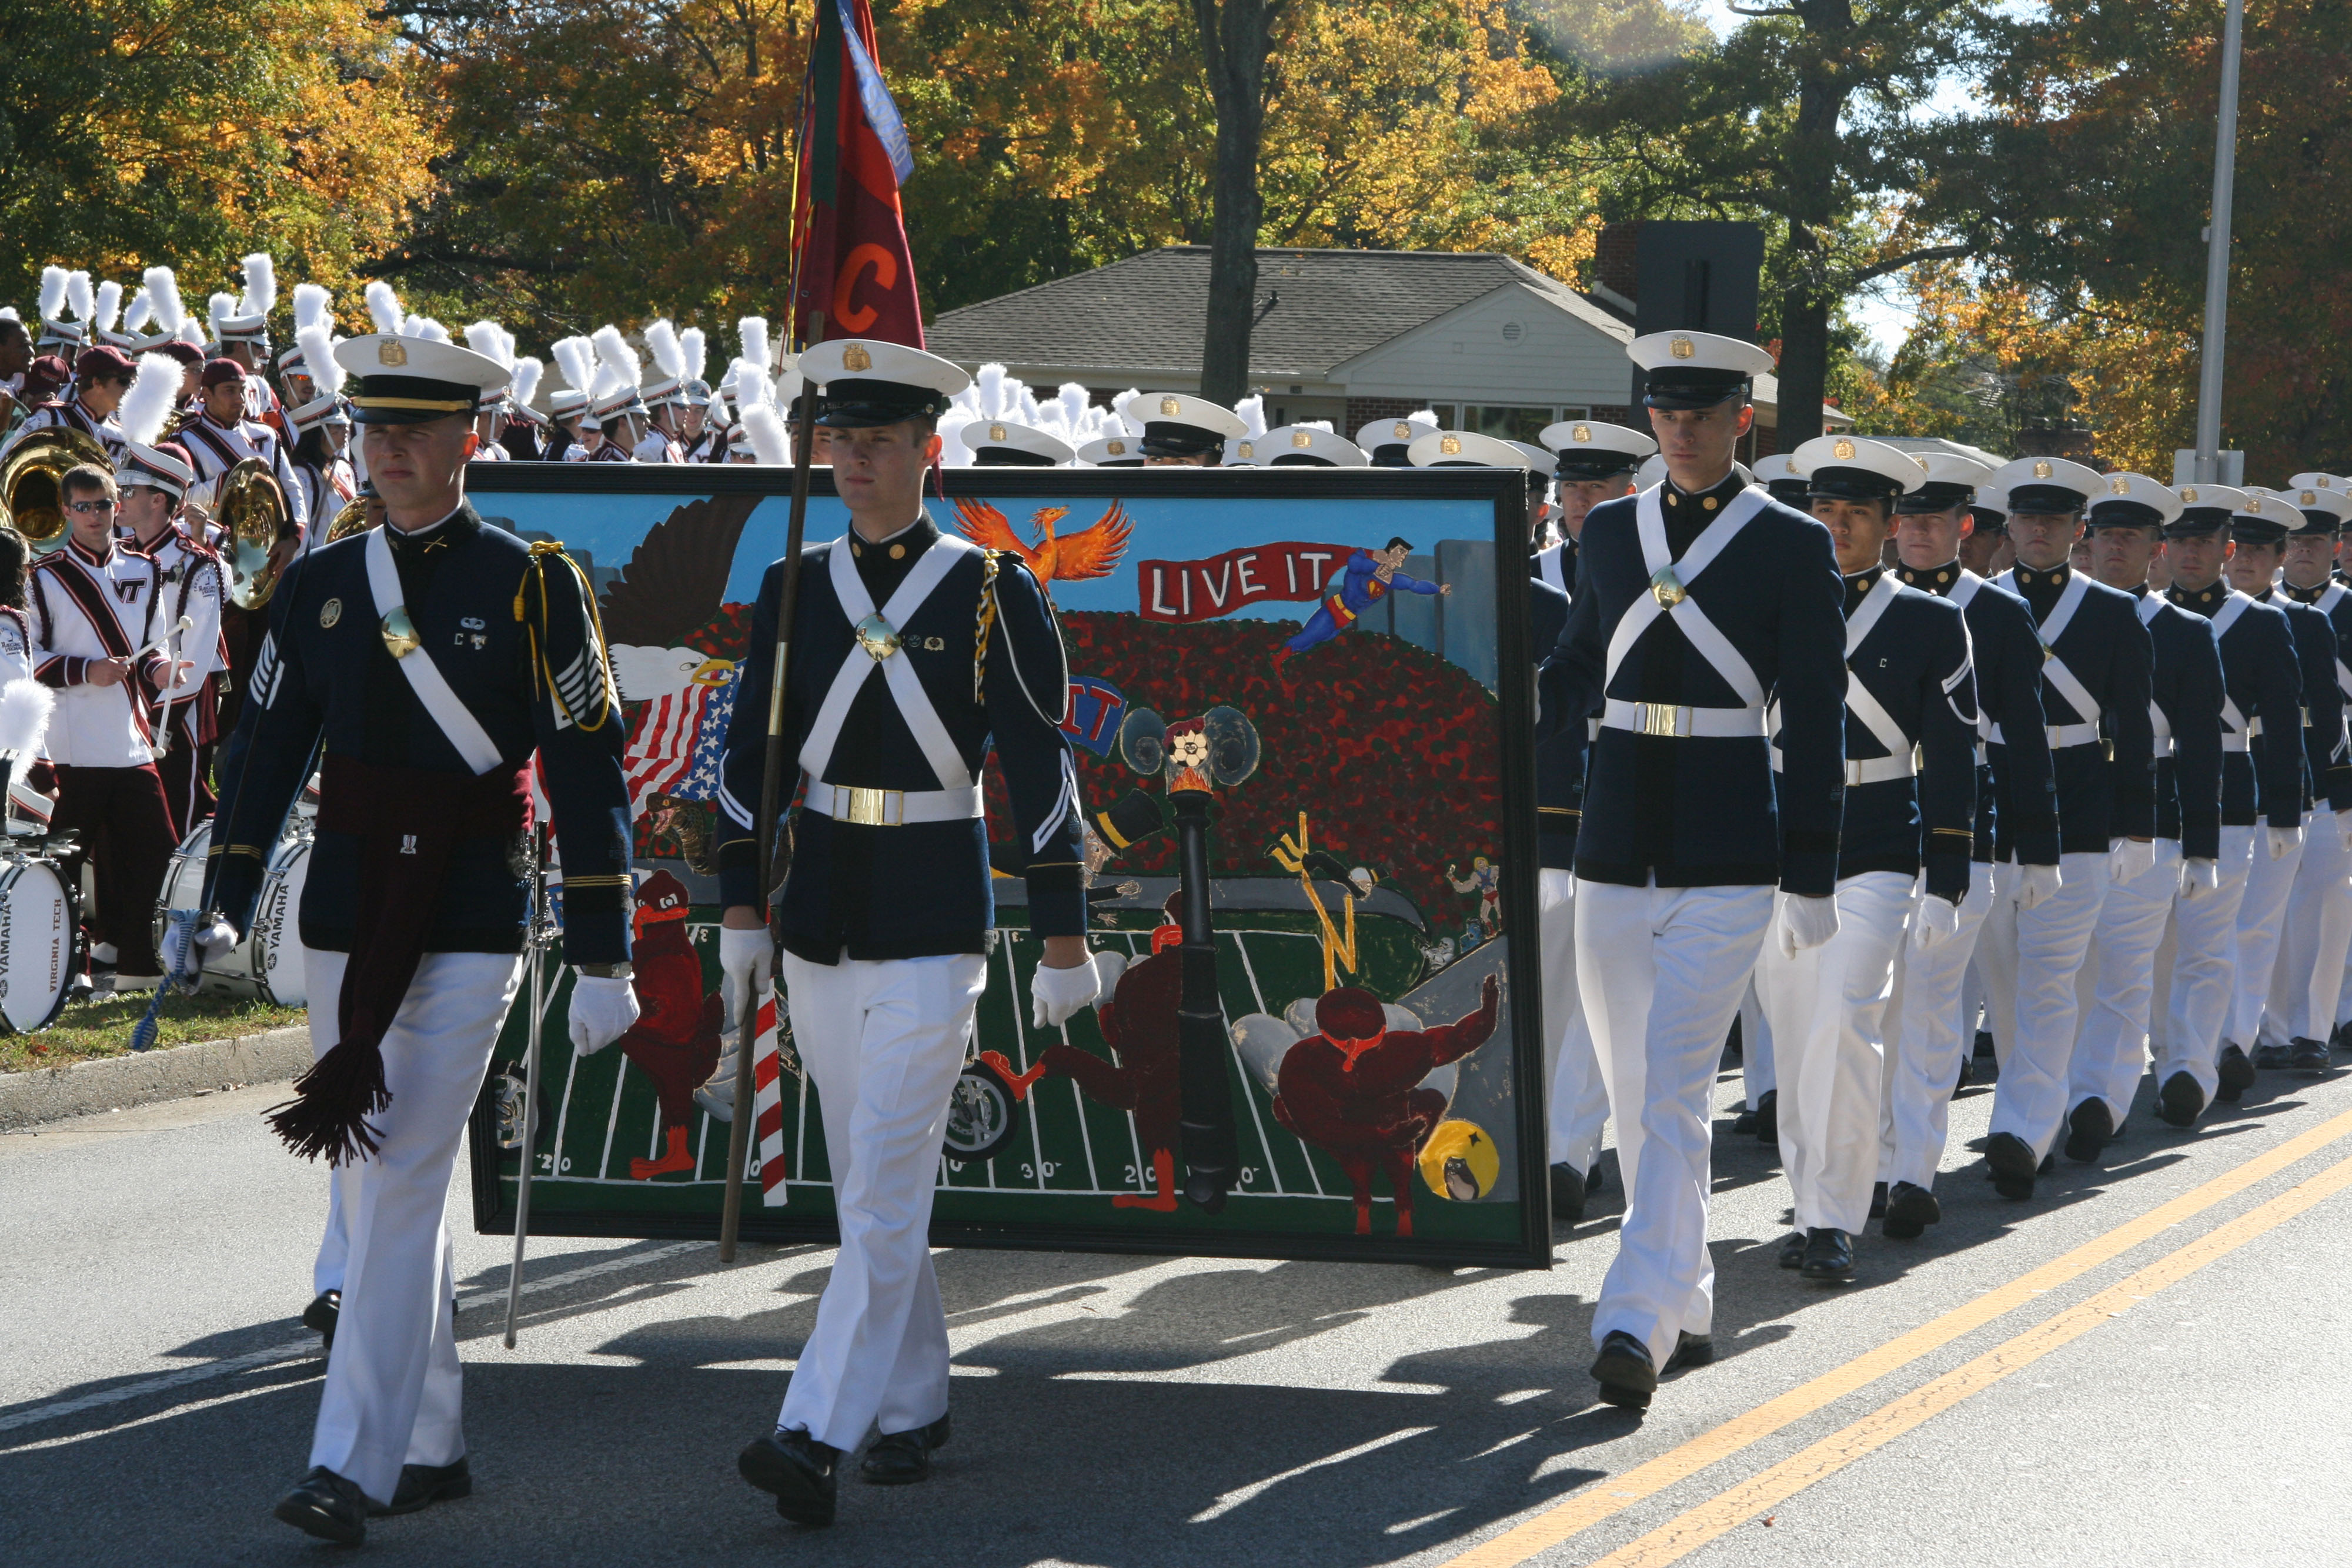 Members of the Virginia Tech Corps of Cadets march during the 2010 Homecoming Parade carrying their unit homecoming banner